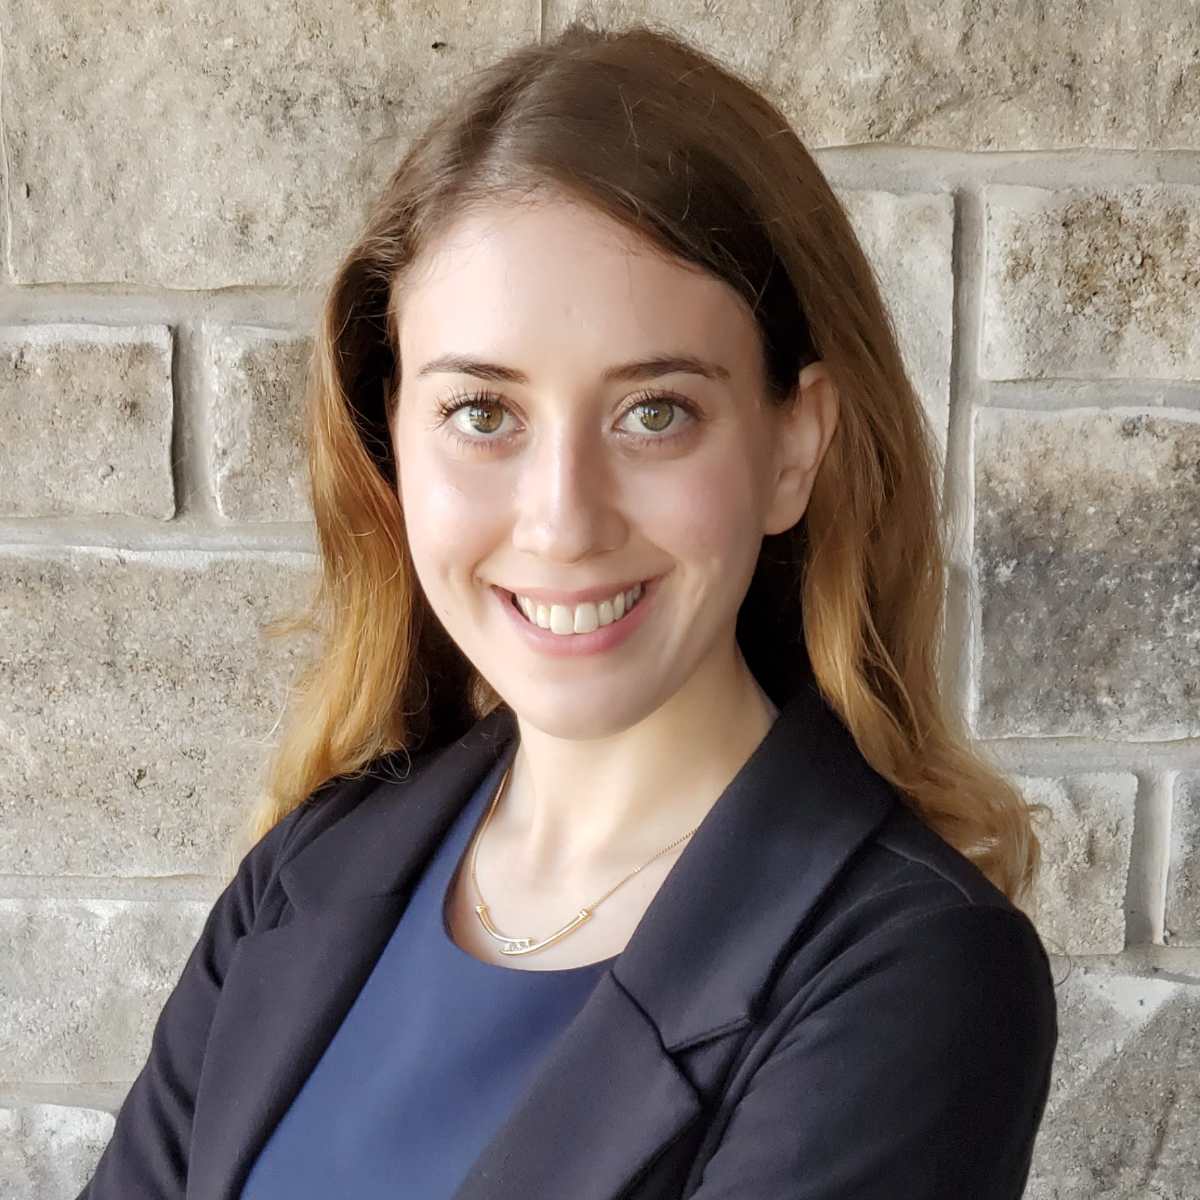 Alumna Nora Nahornick, graduate from the Department of Mathematical and Statistical Sciences and now an analyst at the Office of the Parliamentary Budget Officer.